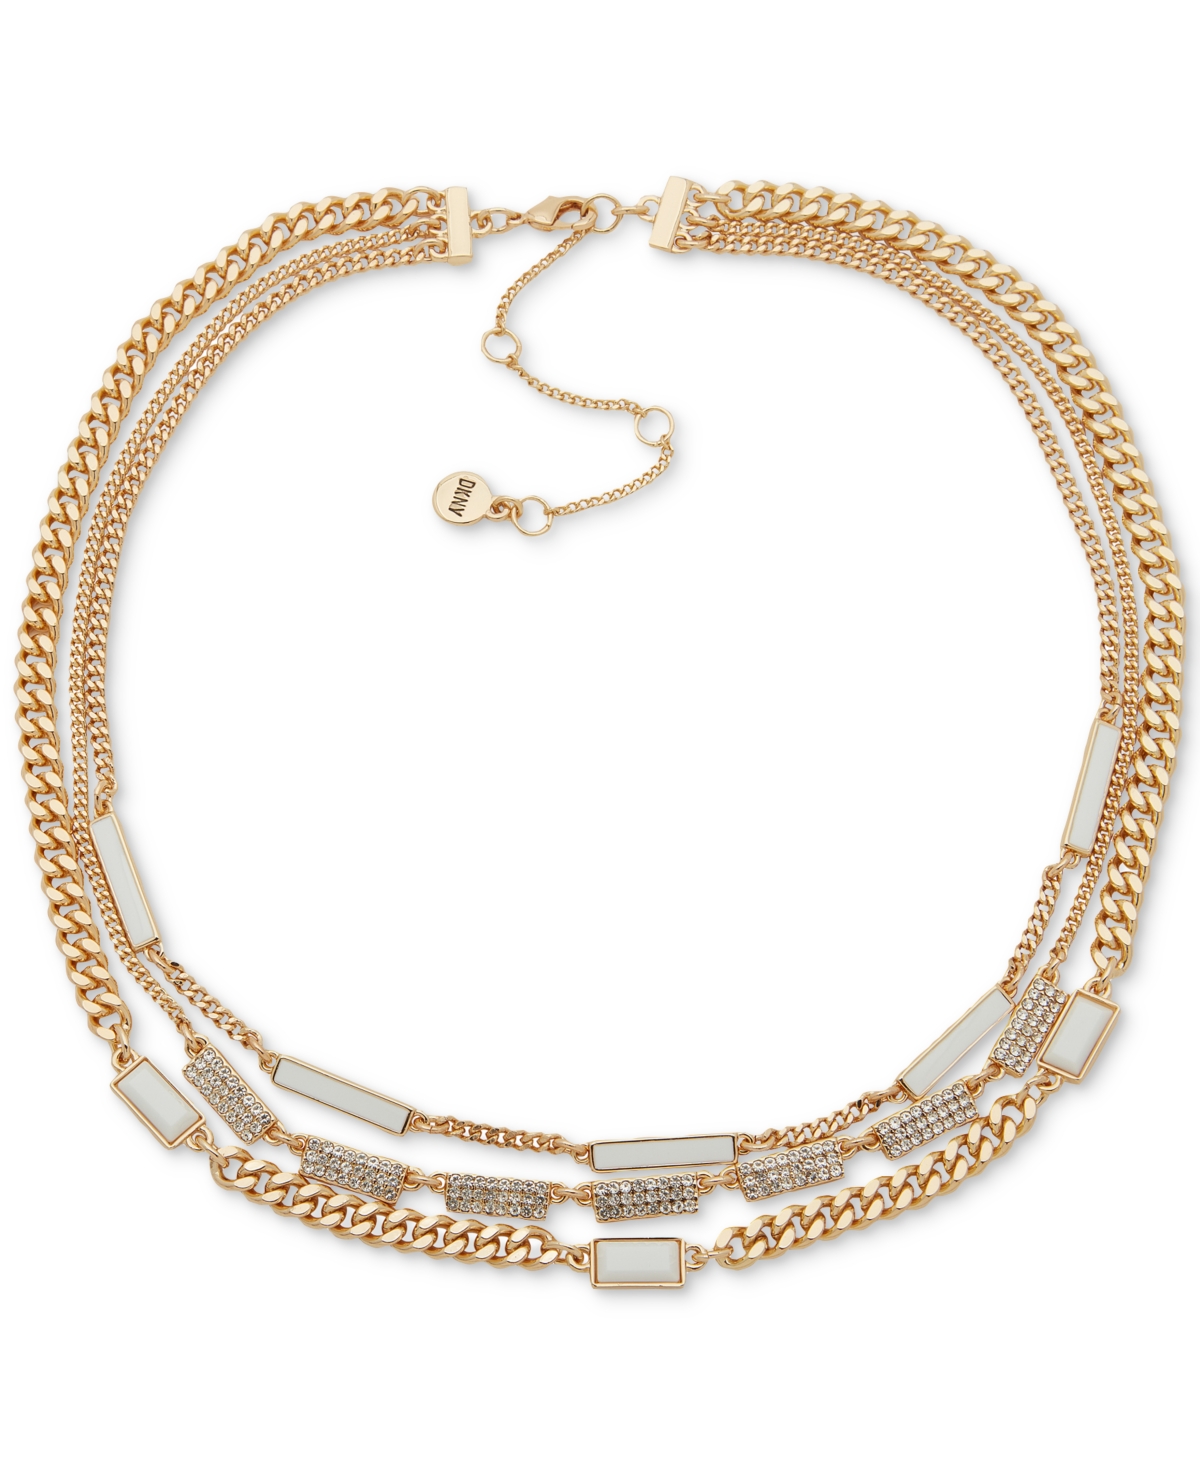 Gold-Tone Pave & Color Stone Layered Necklace, 16" + 3" extender - White